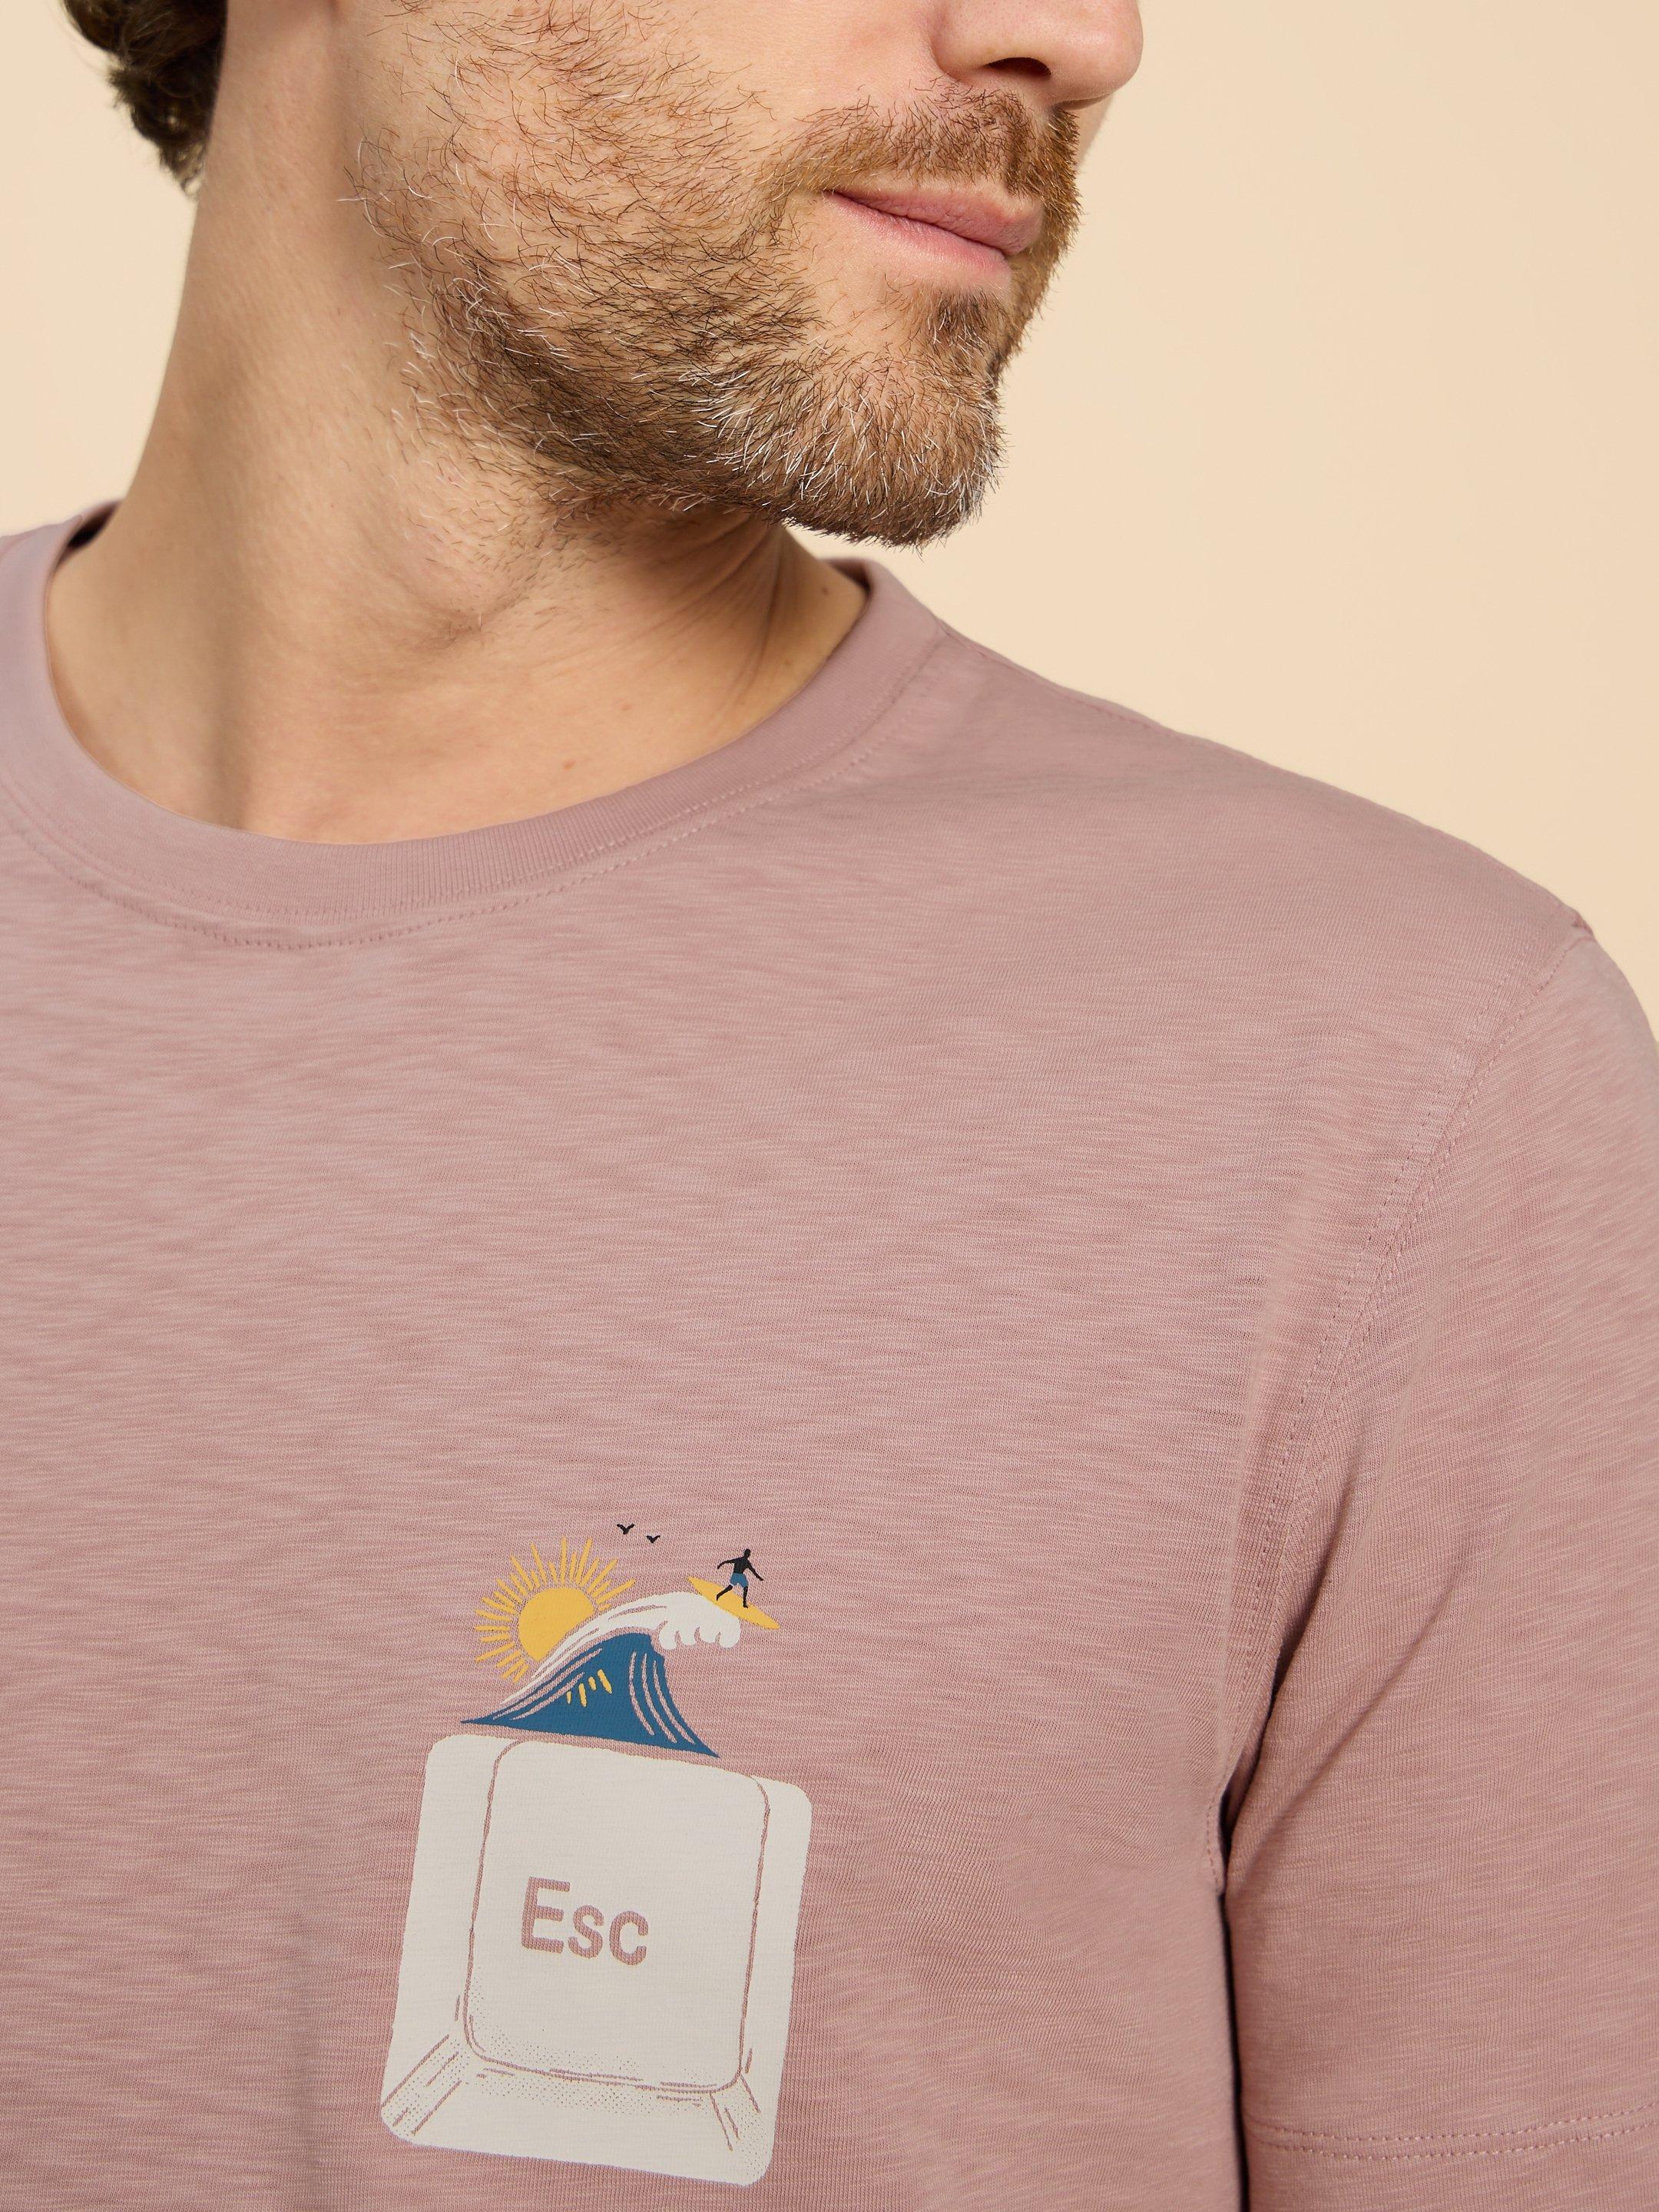 Escape Graphic Short Sleeve Tee in PINK PR - MODEL DETAIL